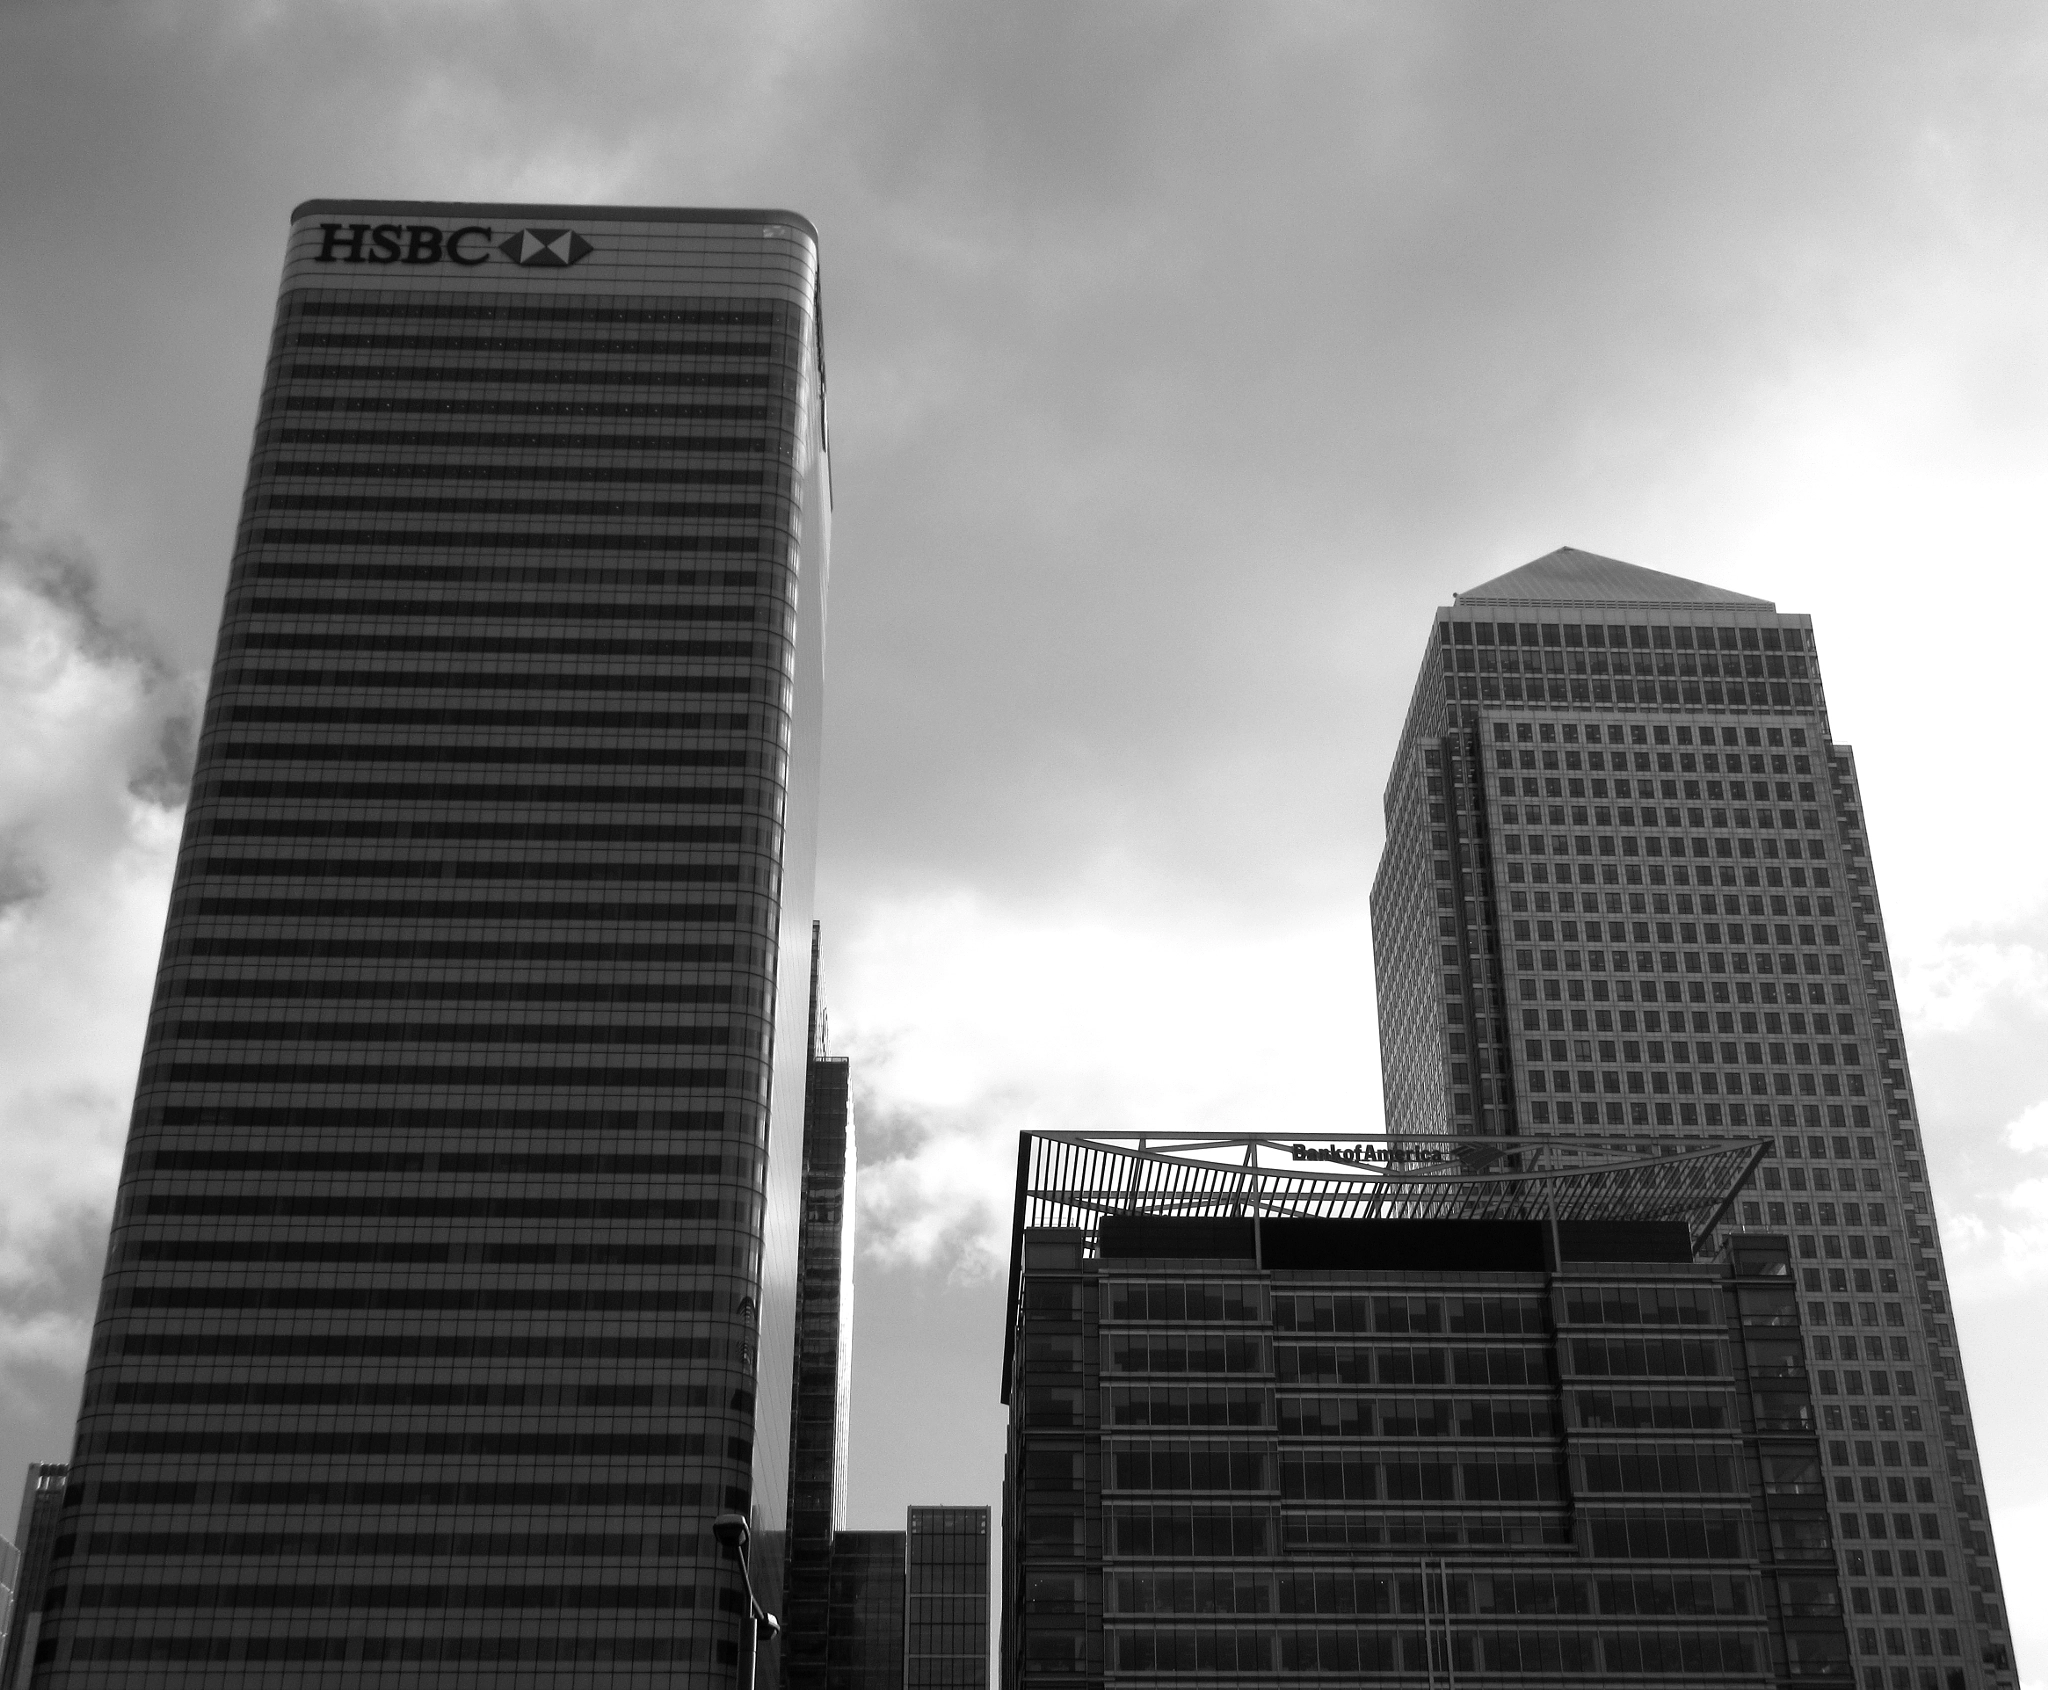 Canon PowerShot ELPH 350 HS (IXUS 275 HS / IXY 640) sample photo. View of canary wharf from poplar station, greater london photography